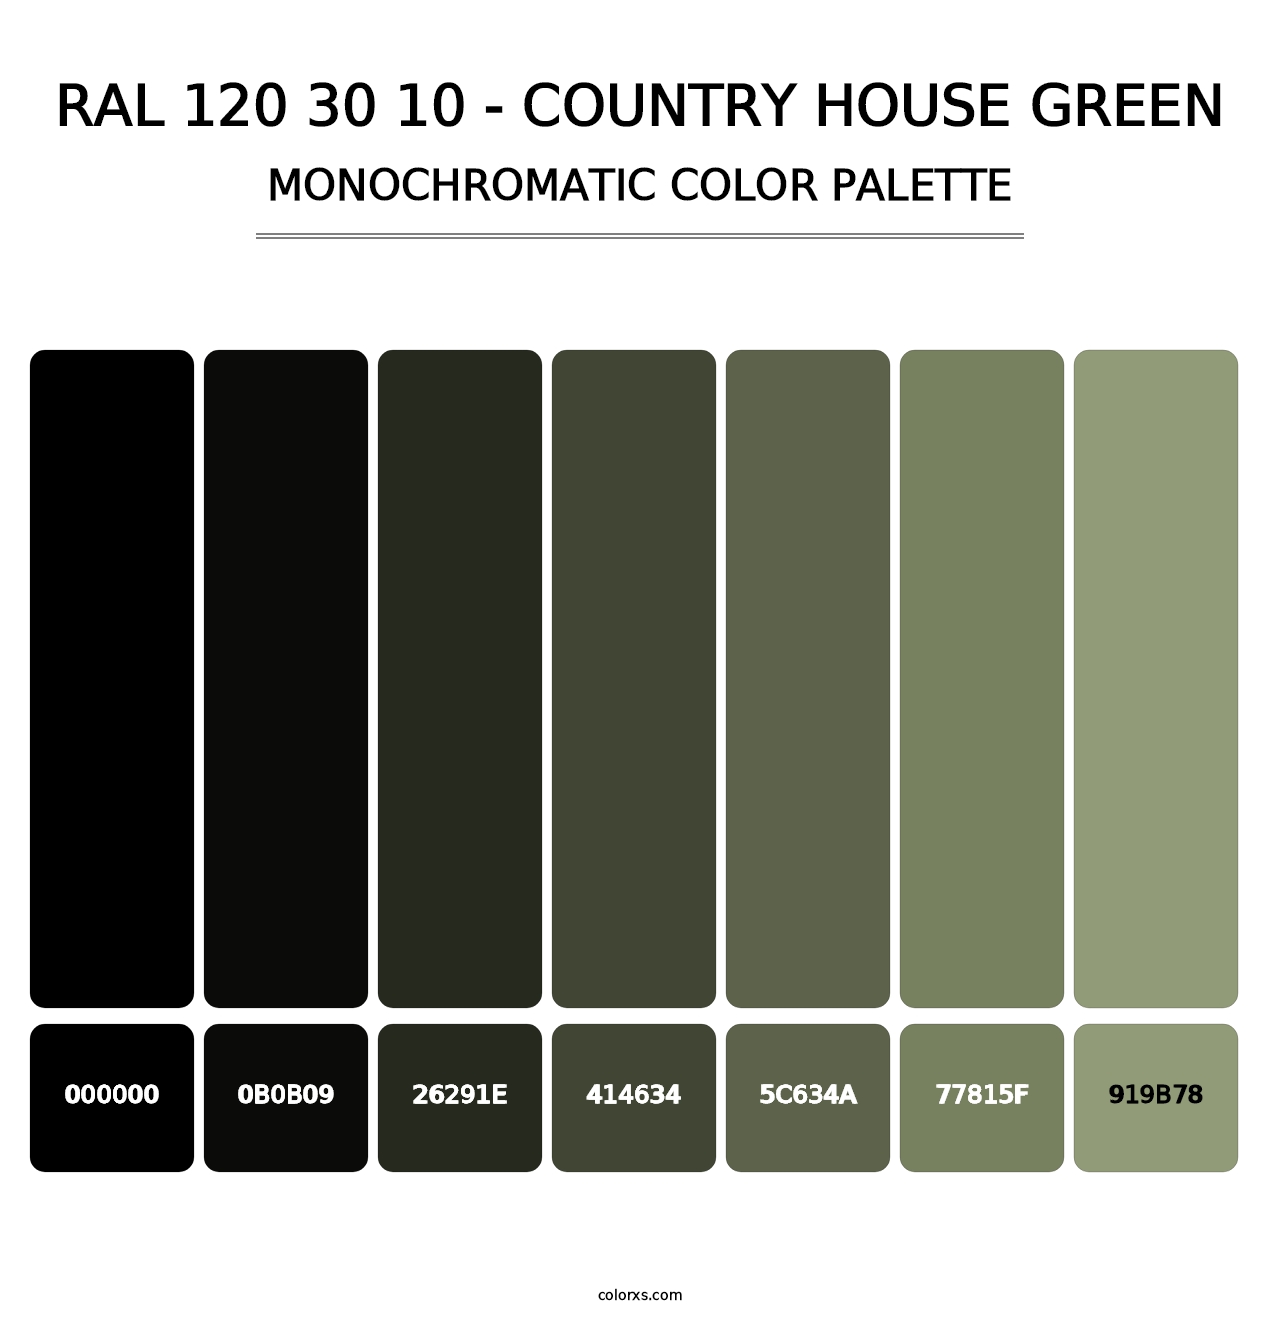 RAL 120 30 10 - Country House Green - Monochromatic Color Palette